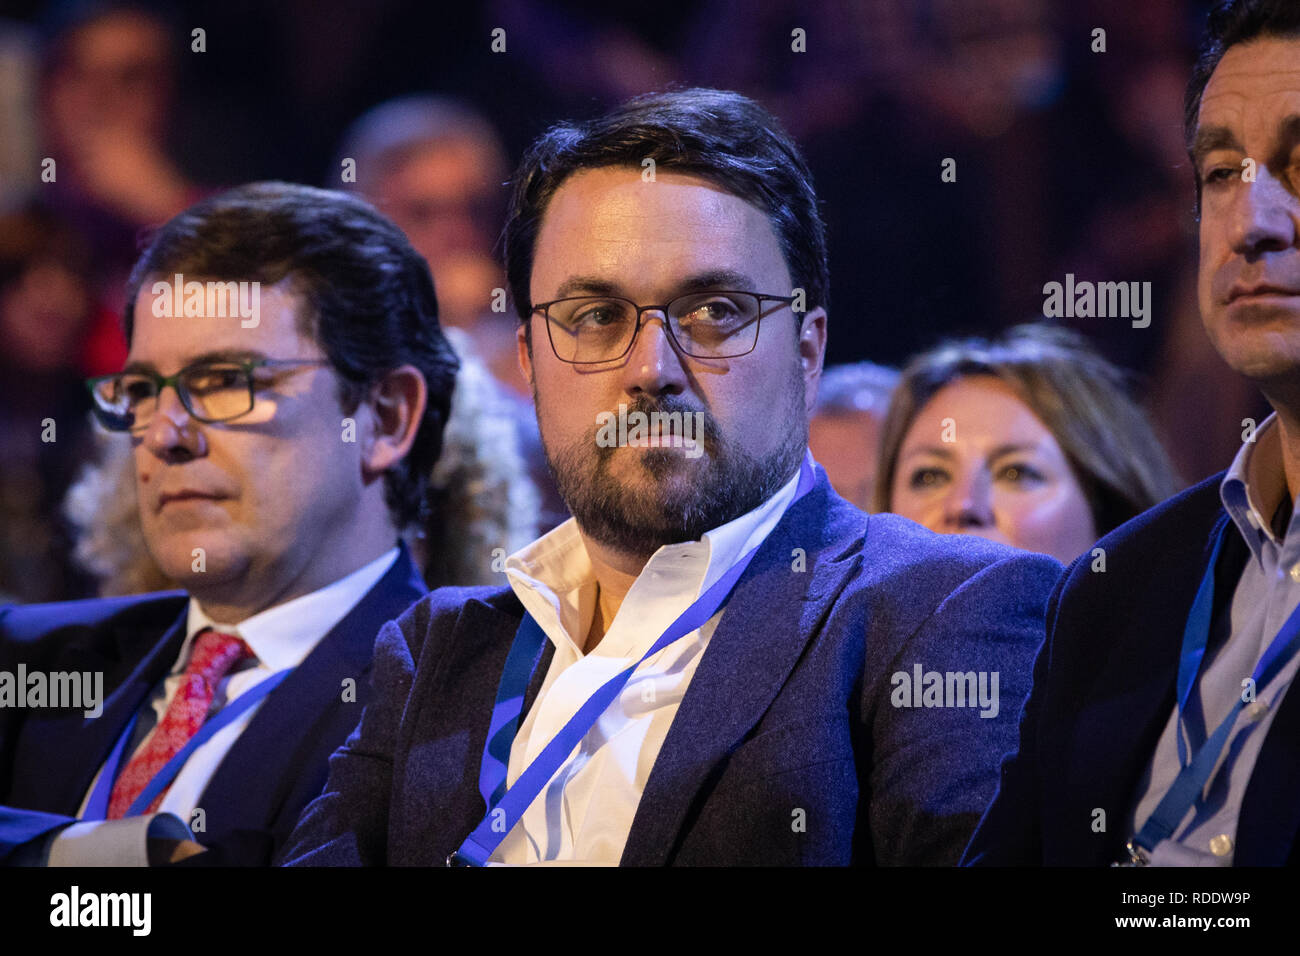 January 18, 2019 - Madrid, Spain - Asier Antona, president of the PP in Canarias. The PP celebrates its national convention to establish the main lines of its electoral program for the three elections scheduled for May 26 and are key to gauge the leadership of the popular president, Pablo Casado. (Credit Image: © Jesus Hellin/ZUMA Wire) Stock Photo